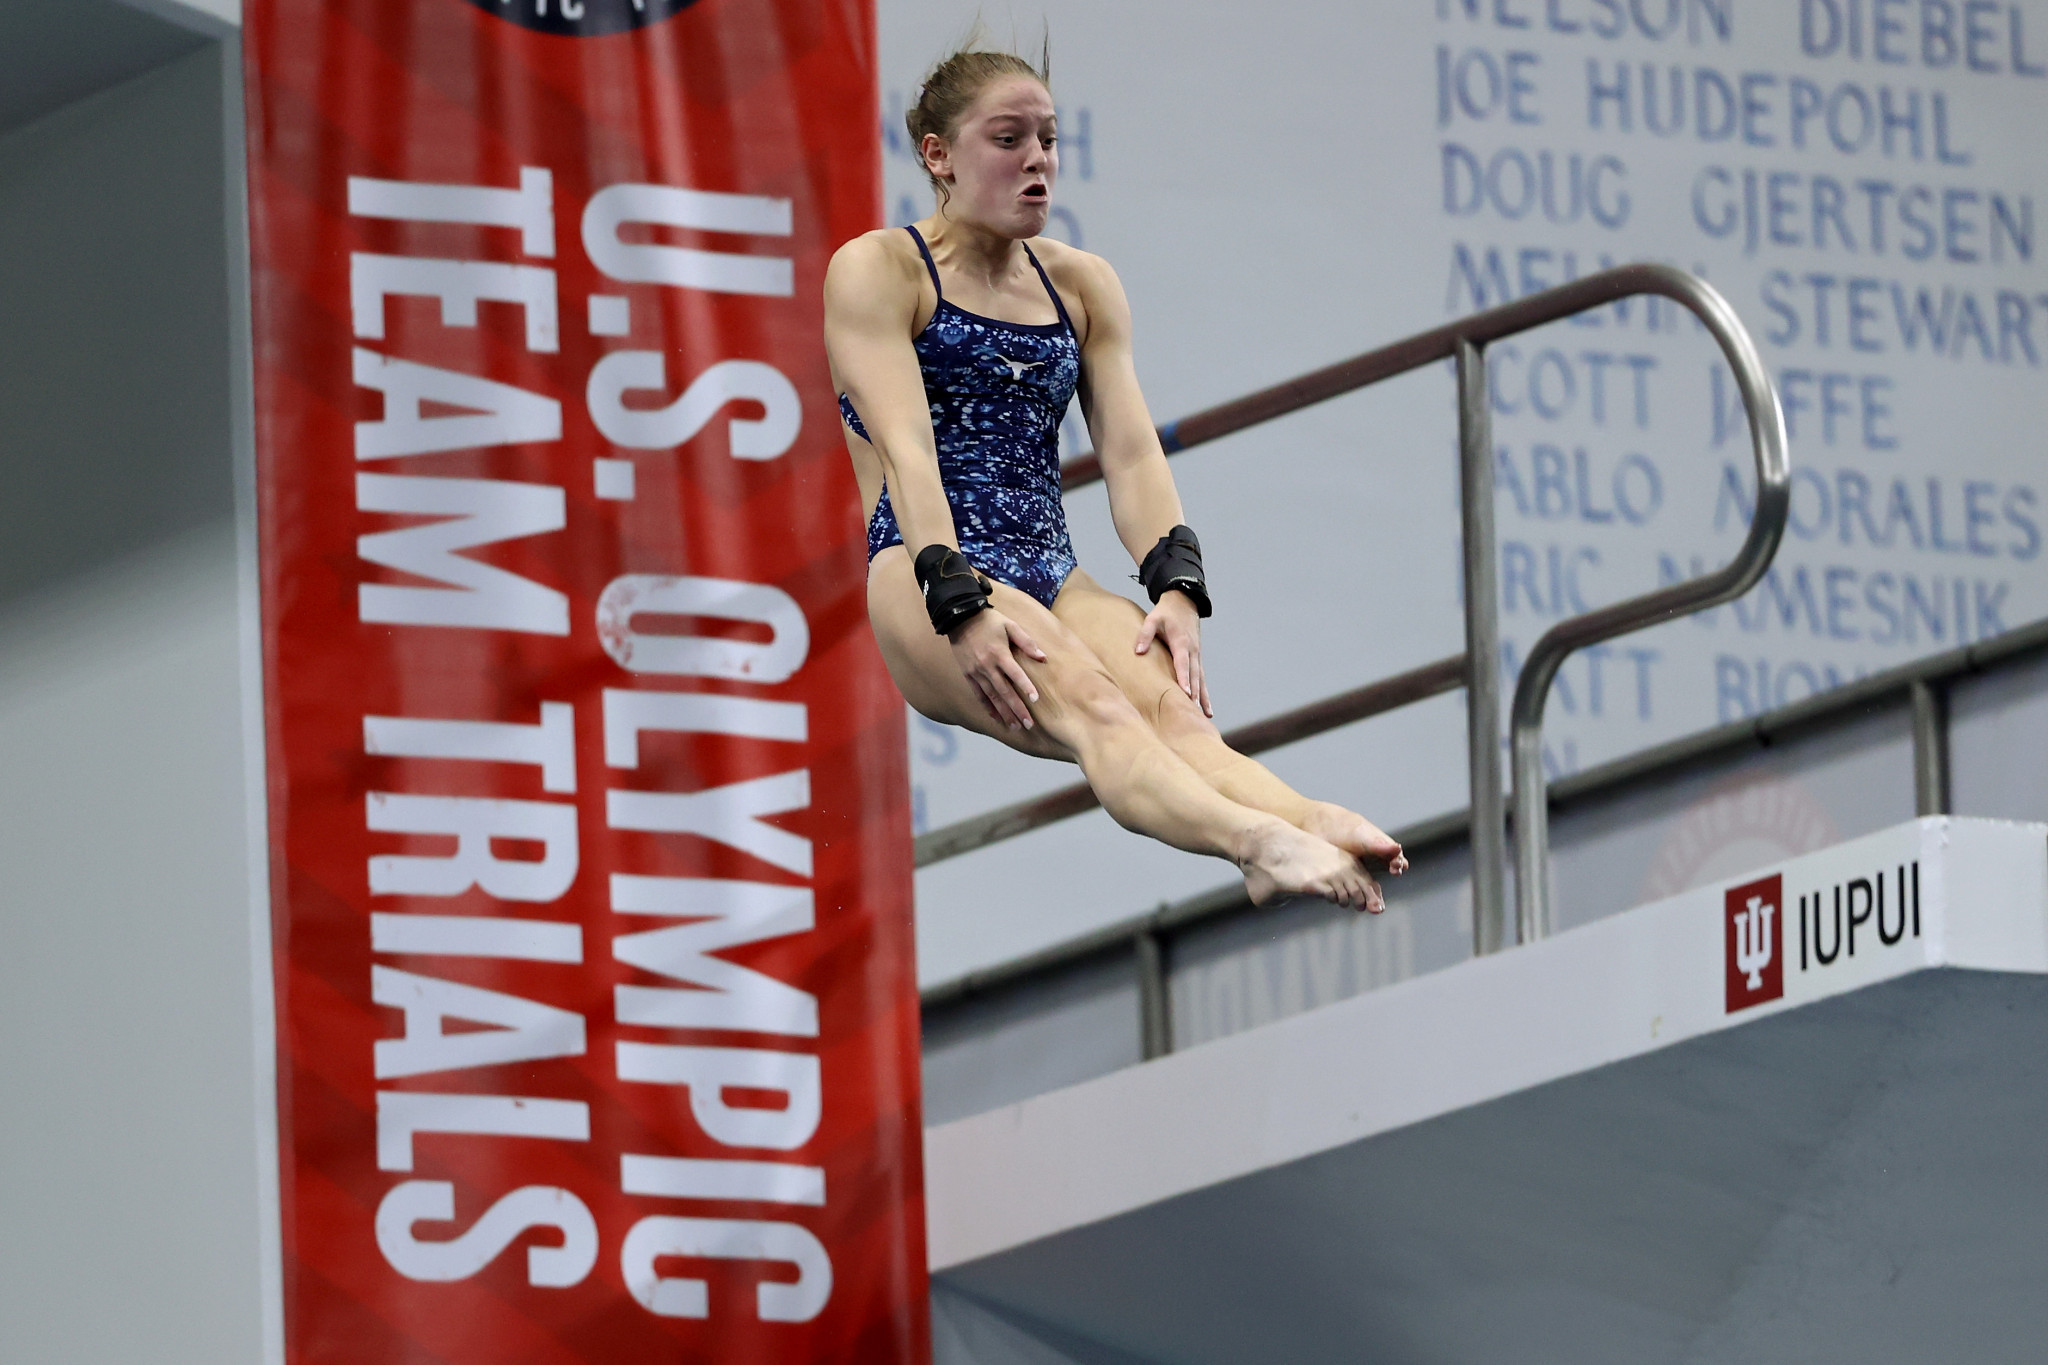 Indianapolis held the US Olympic diving trials for Tokyo 2020 and Paris 2024 ©Getty Images